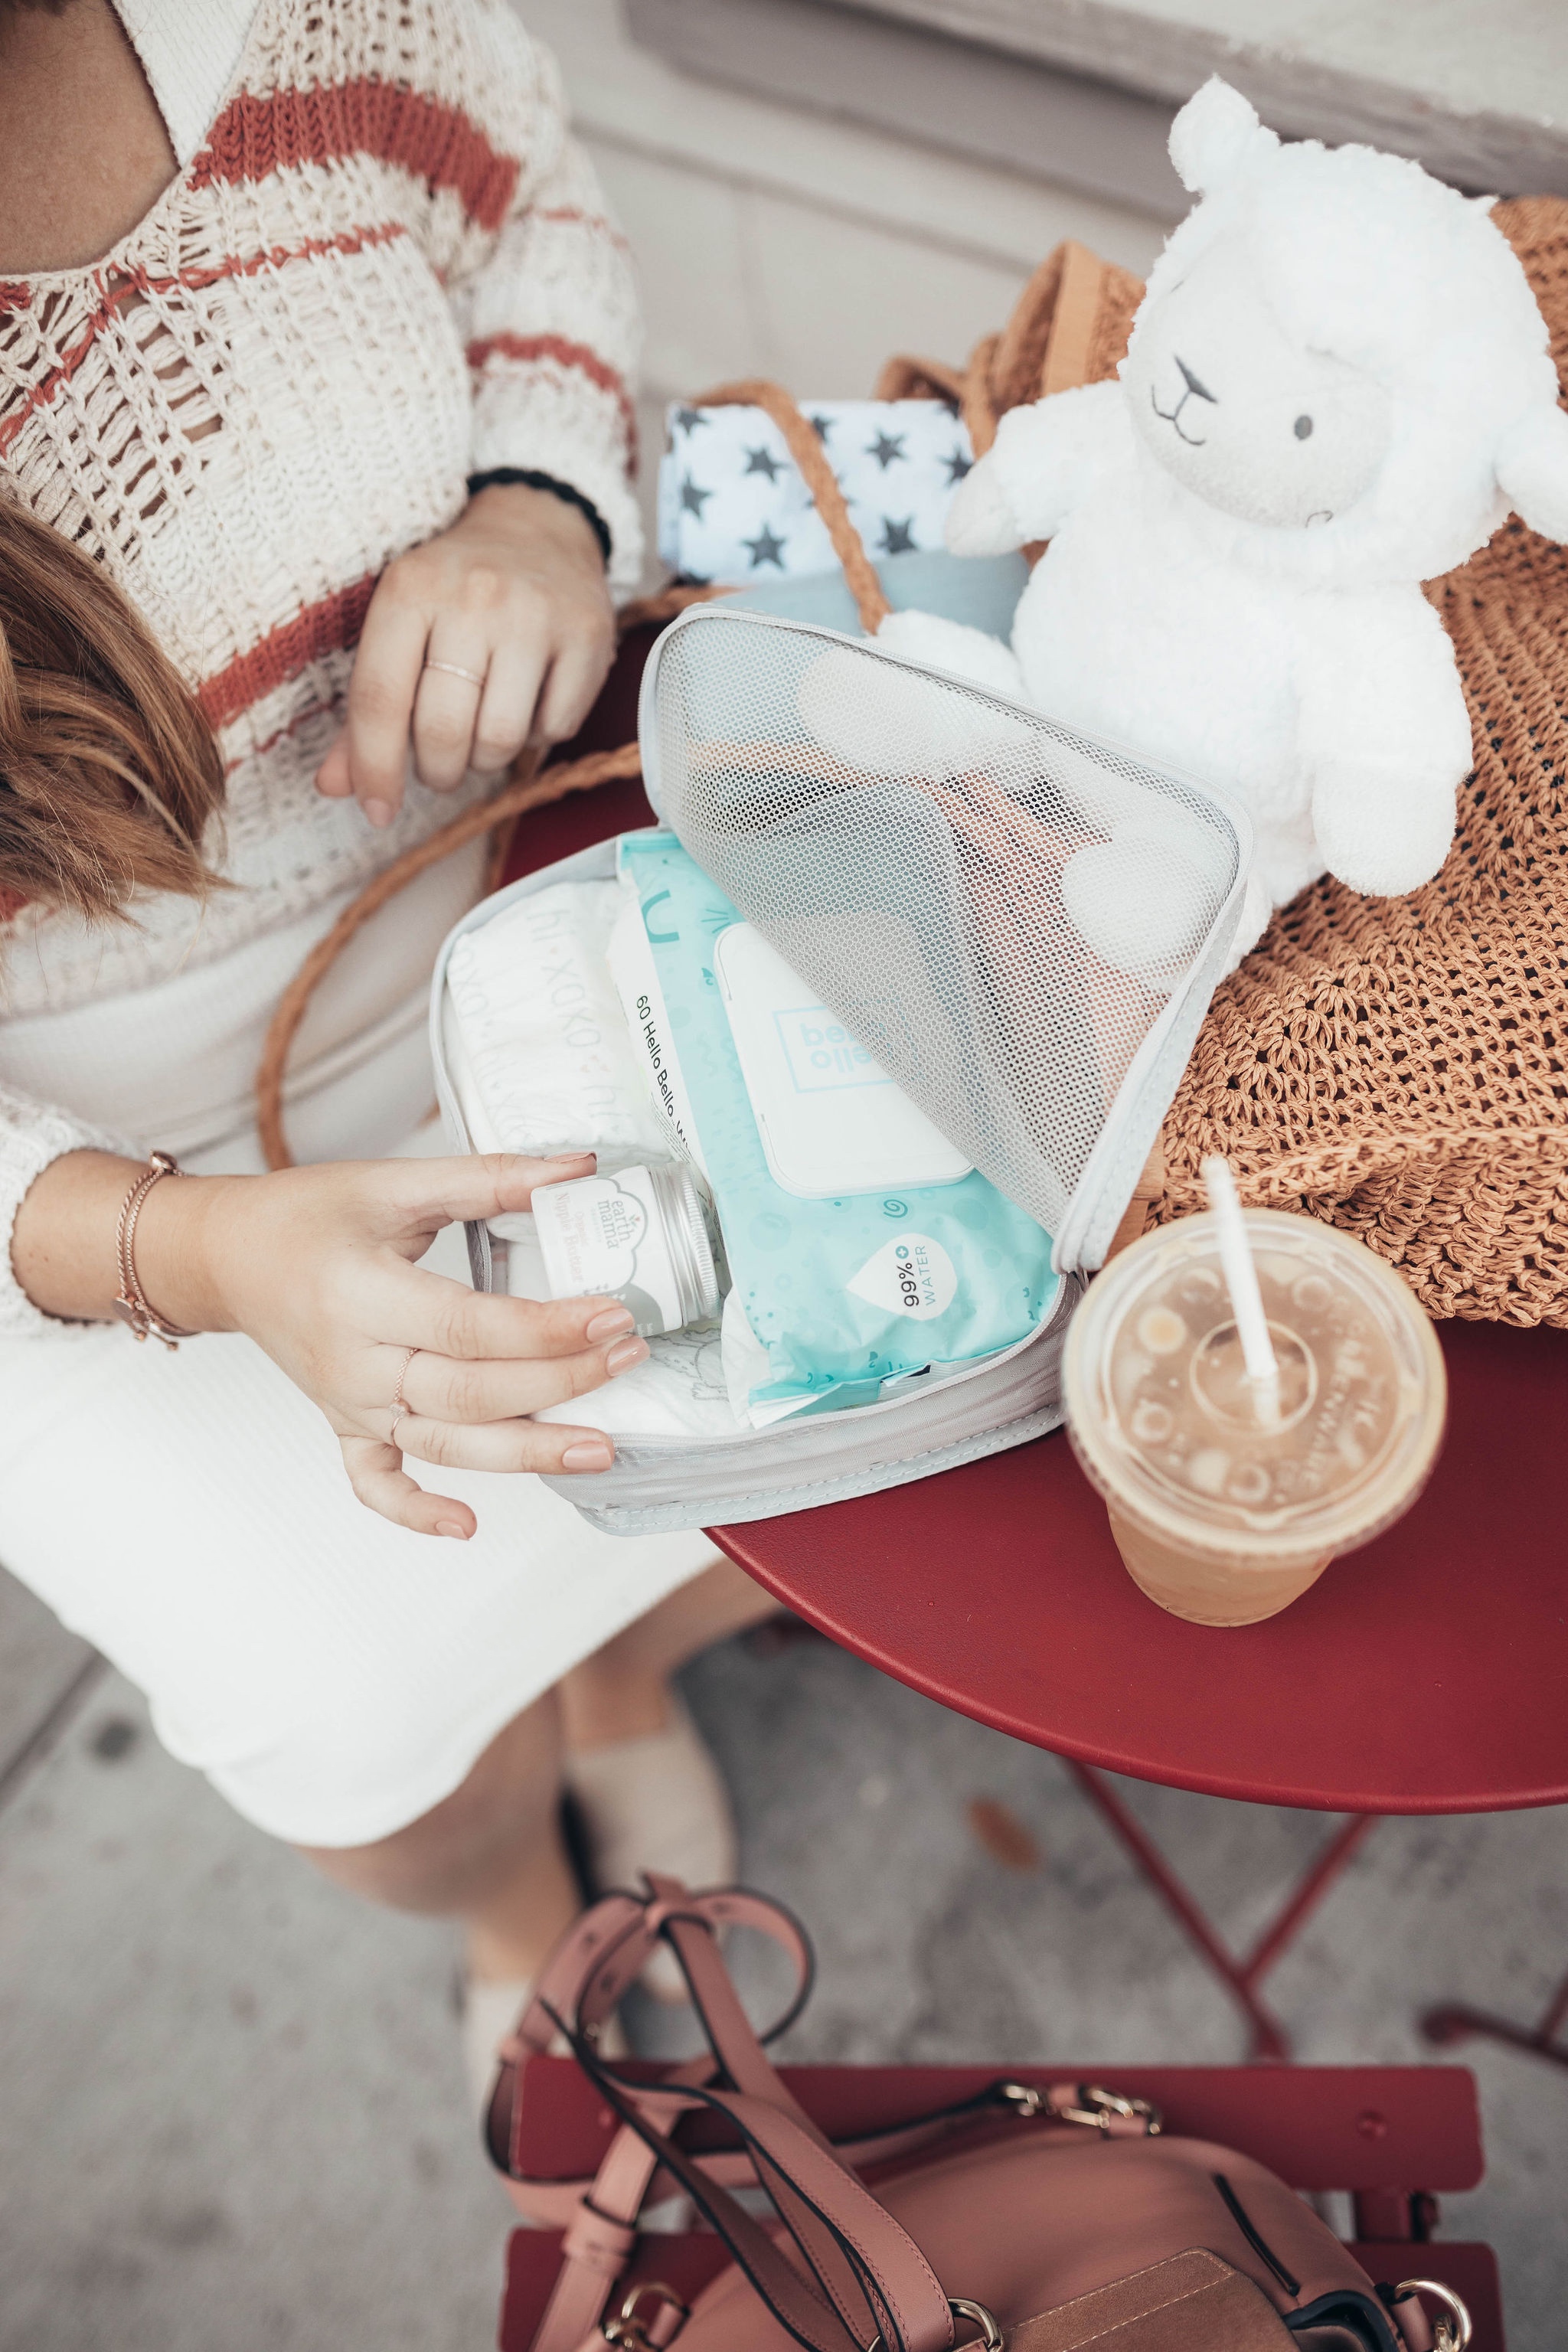 25 Bestseller Walmart Baby Products by popular San Francisco life and style blog, Just Add Glam: image of a woman sitting at a cafe table outside with an iced coffee, Walmart Mustela newborn arrival gift set, and other various Walmart baby products.